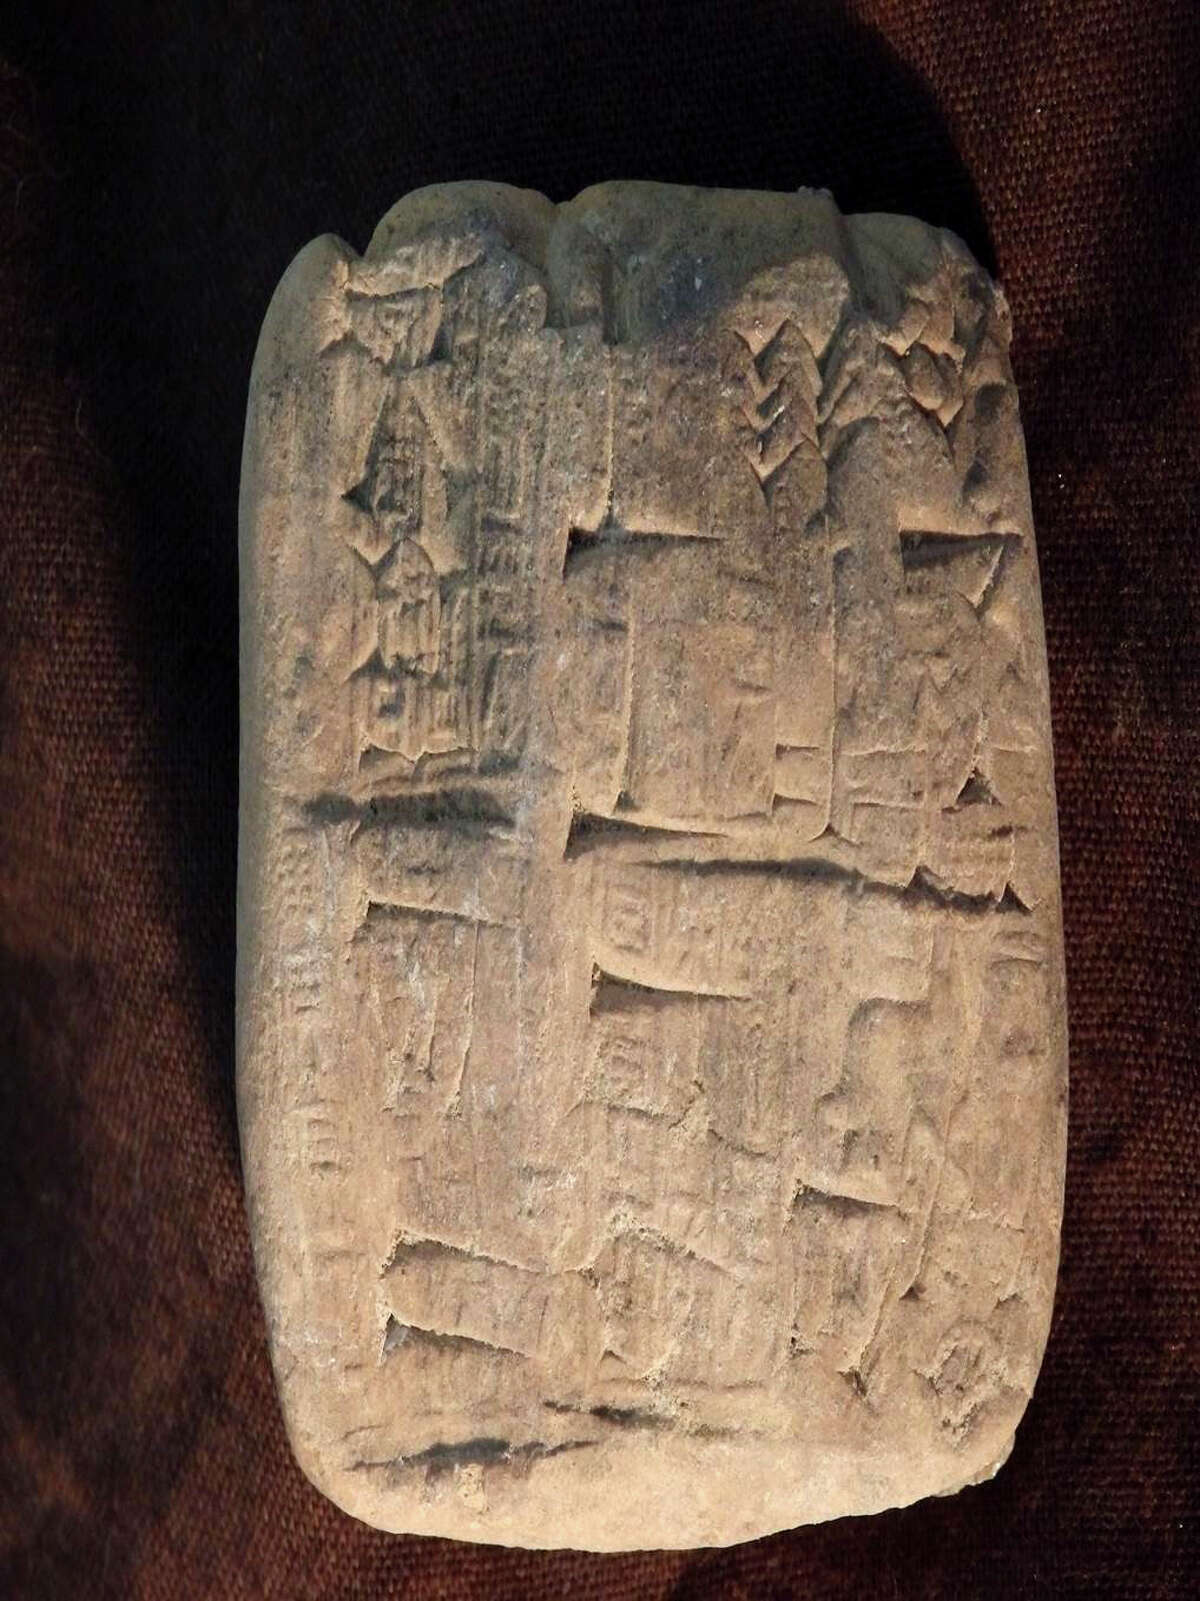 In an undated handout photo, a cuneiform tablet, one of several artifacts smuggled from Iraq by owners of Hobby Lobby, according to a civil complaint filed on Wednesday by federal prosecutors in Brooklyn. Under an agreement with the federal government, the company consented to return some of the items and improve the way its collects antiquities. (U.S. Attorney for the Eastern District of New York via The New York Times) Â?— FOR EDITORIAL USE ONLY